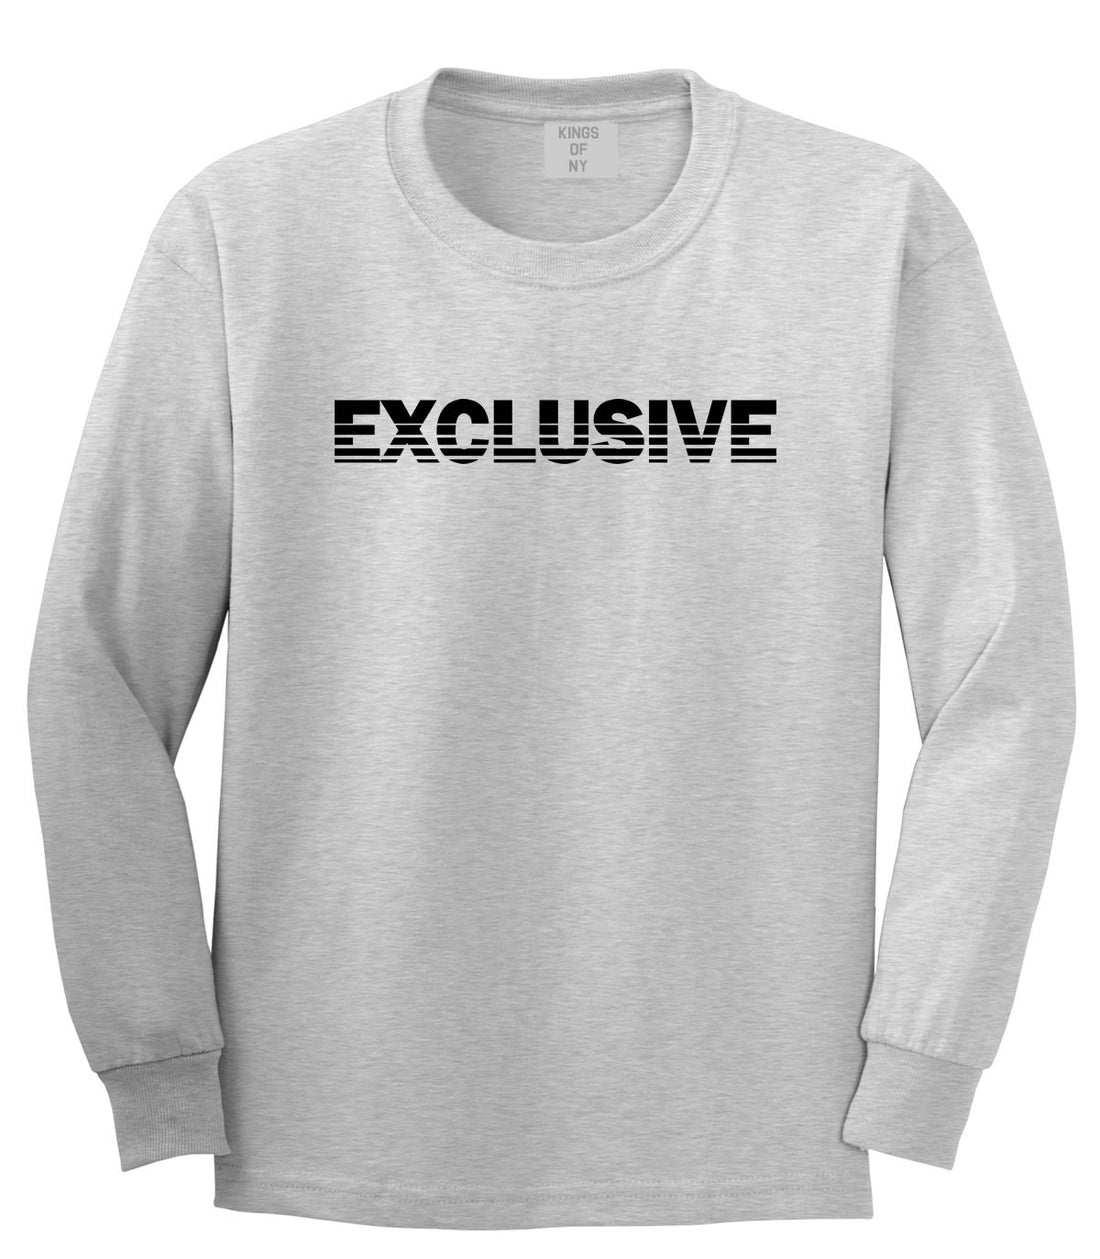 Exclusive Racing Style Boys Kids Long Sleeve T-Shirt in Grey by Kings Of NY